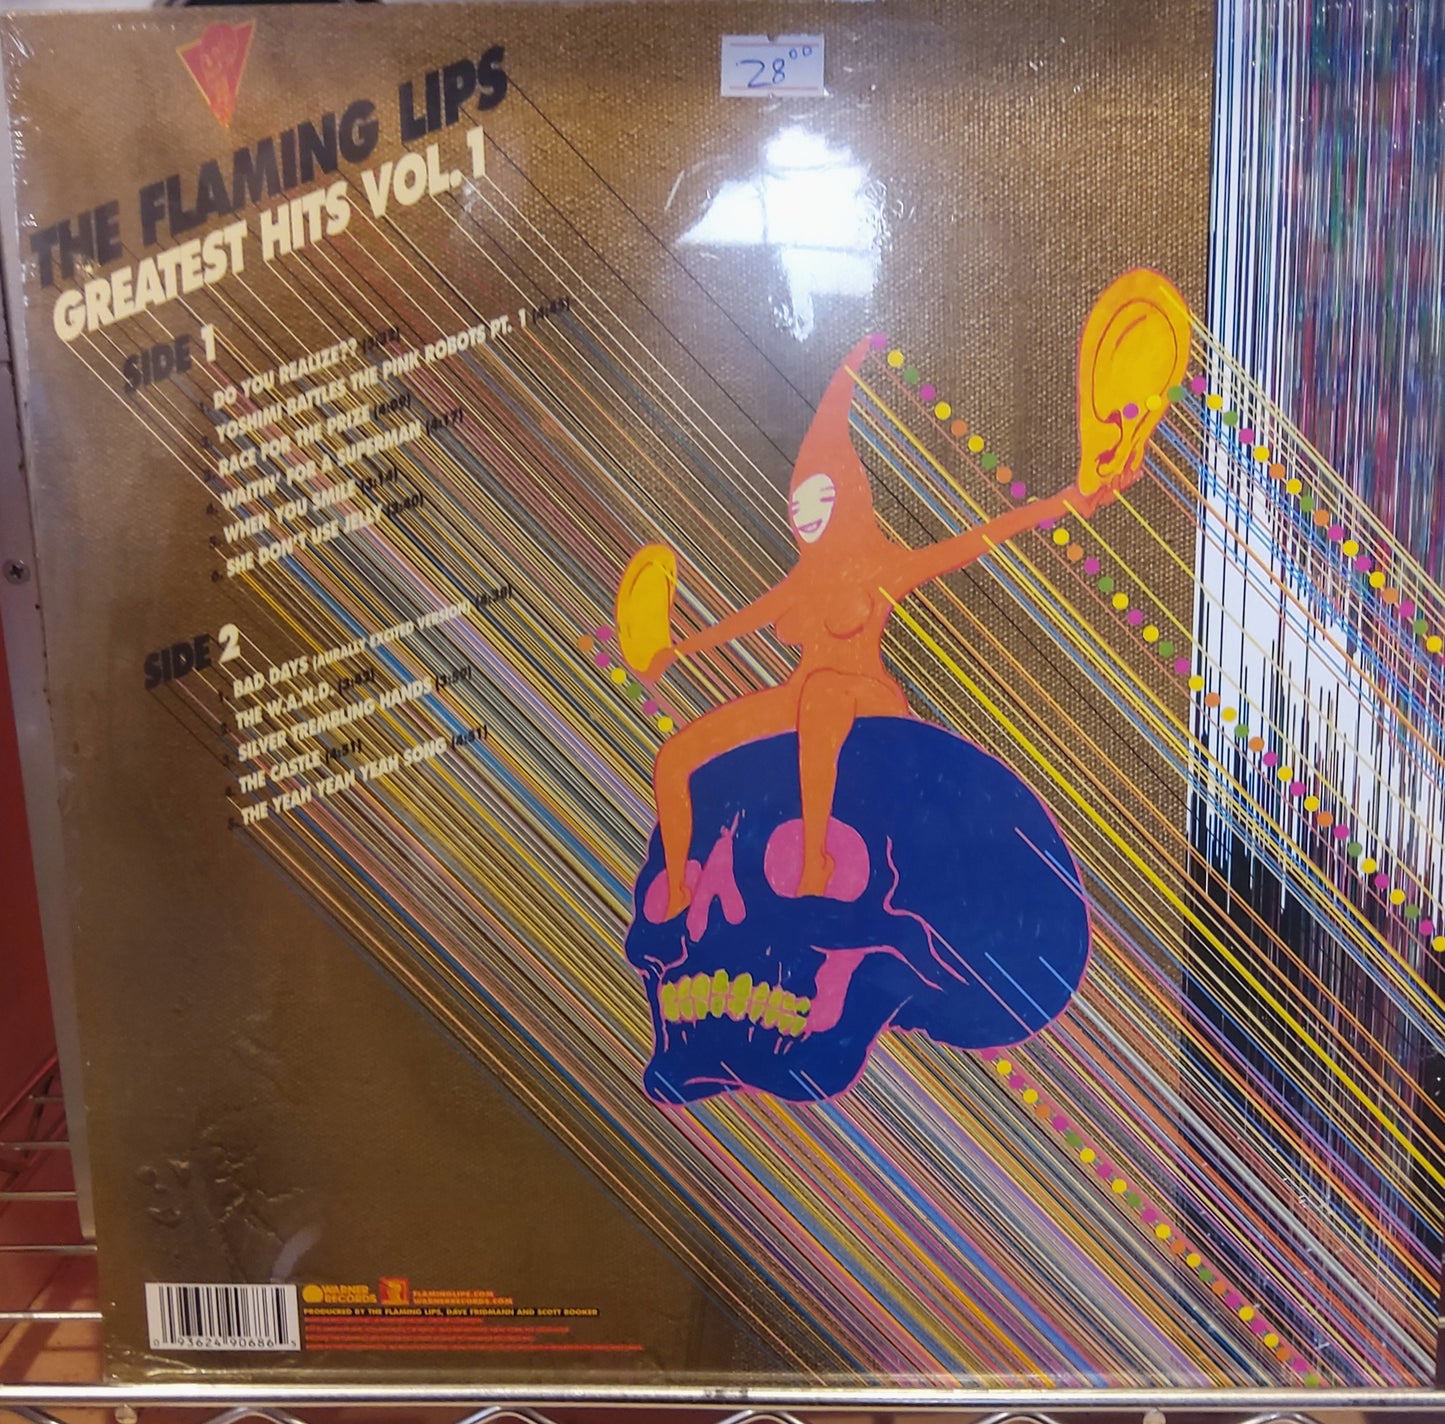 The Flaming Lips, Greatest Hits Vol. (Sealed, Vinyl)